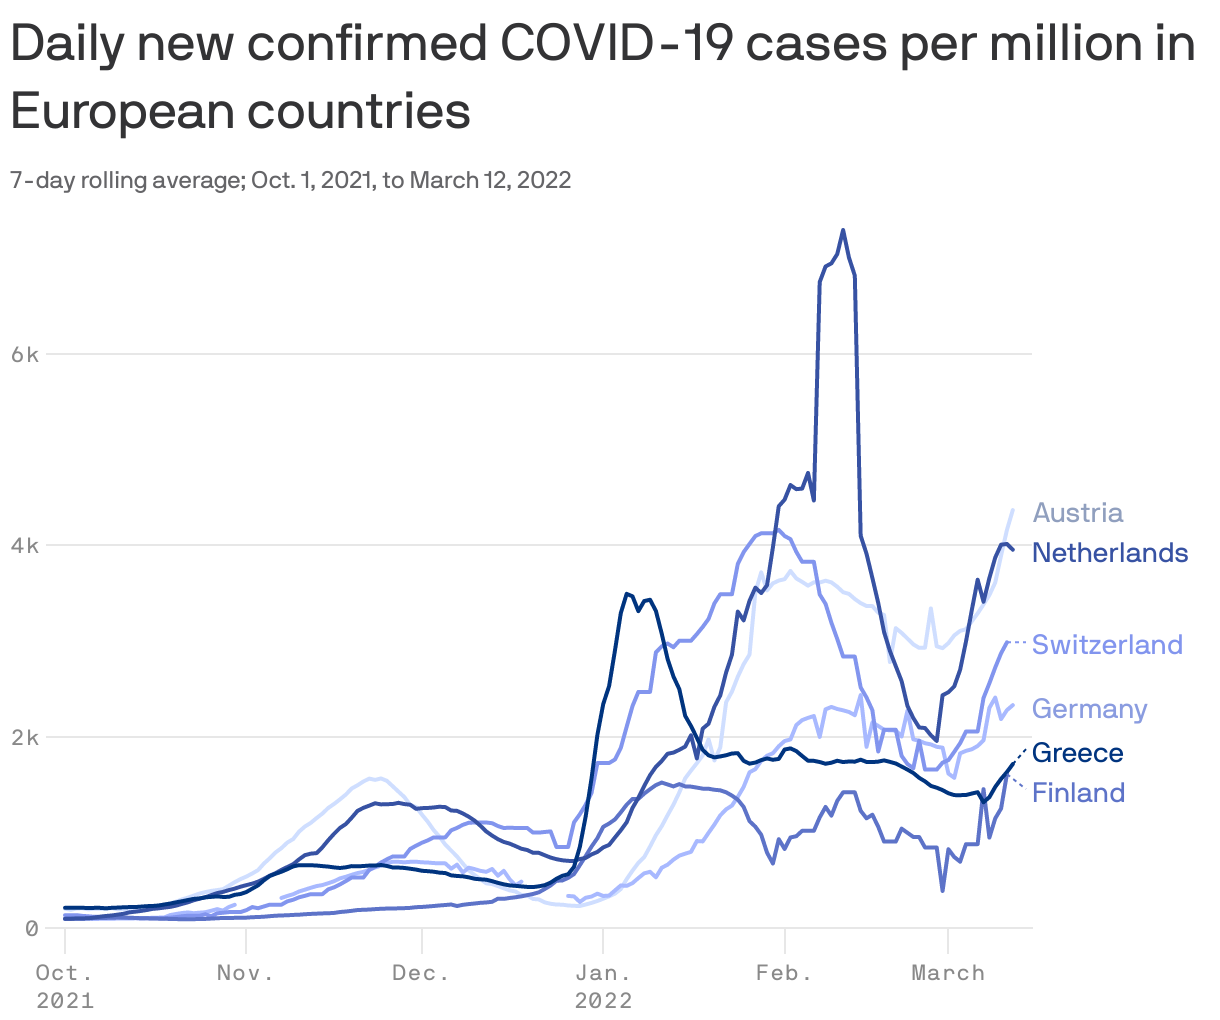 Daily new confirmed COVID-19 cases per million in European countries